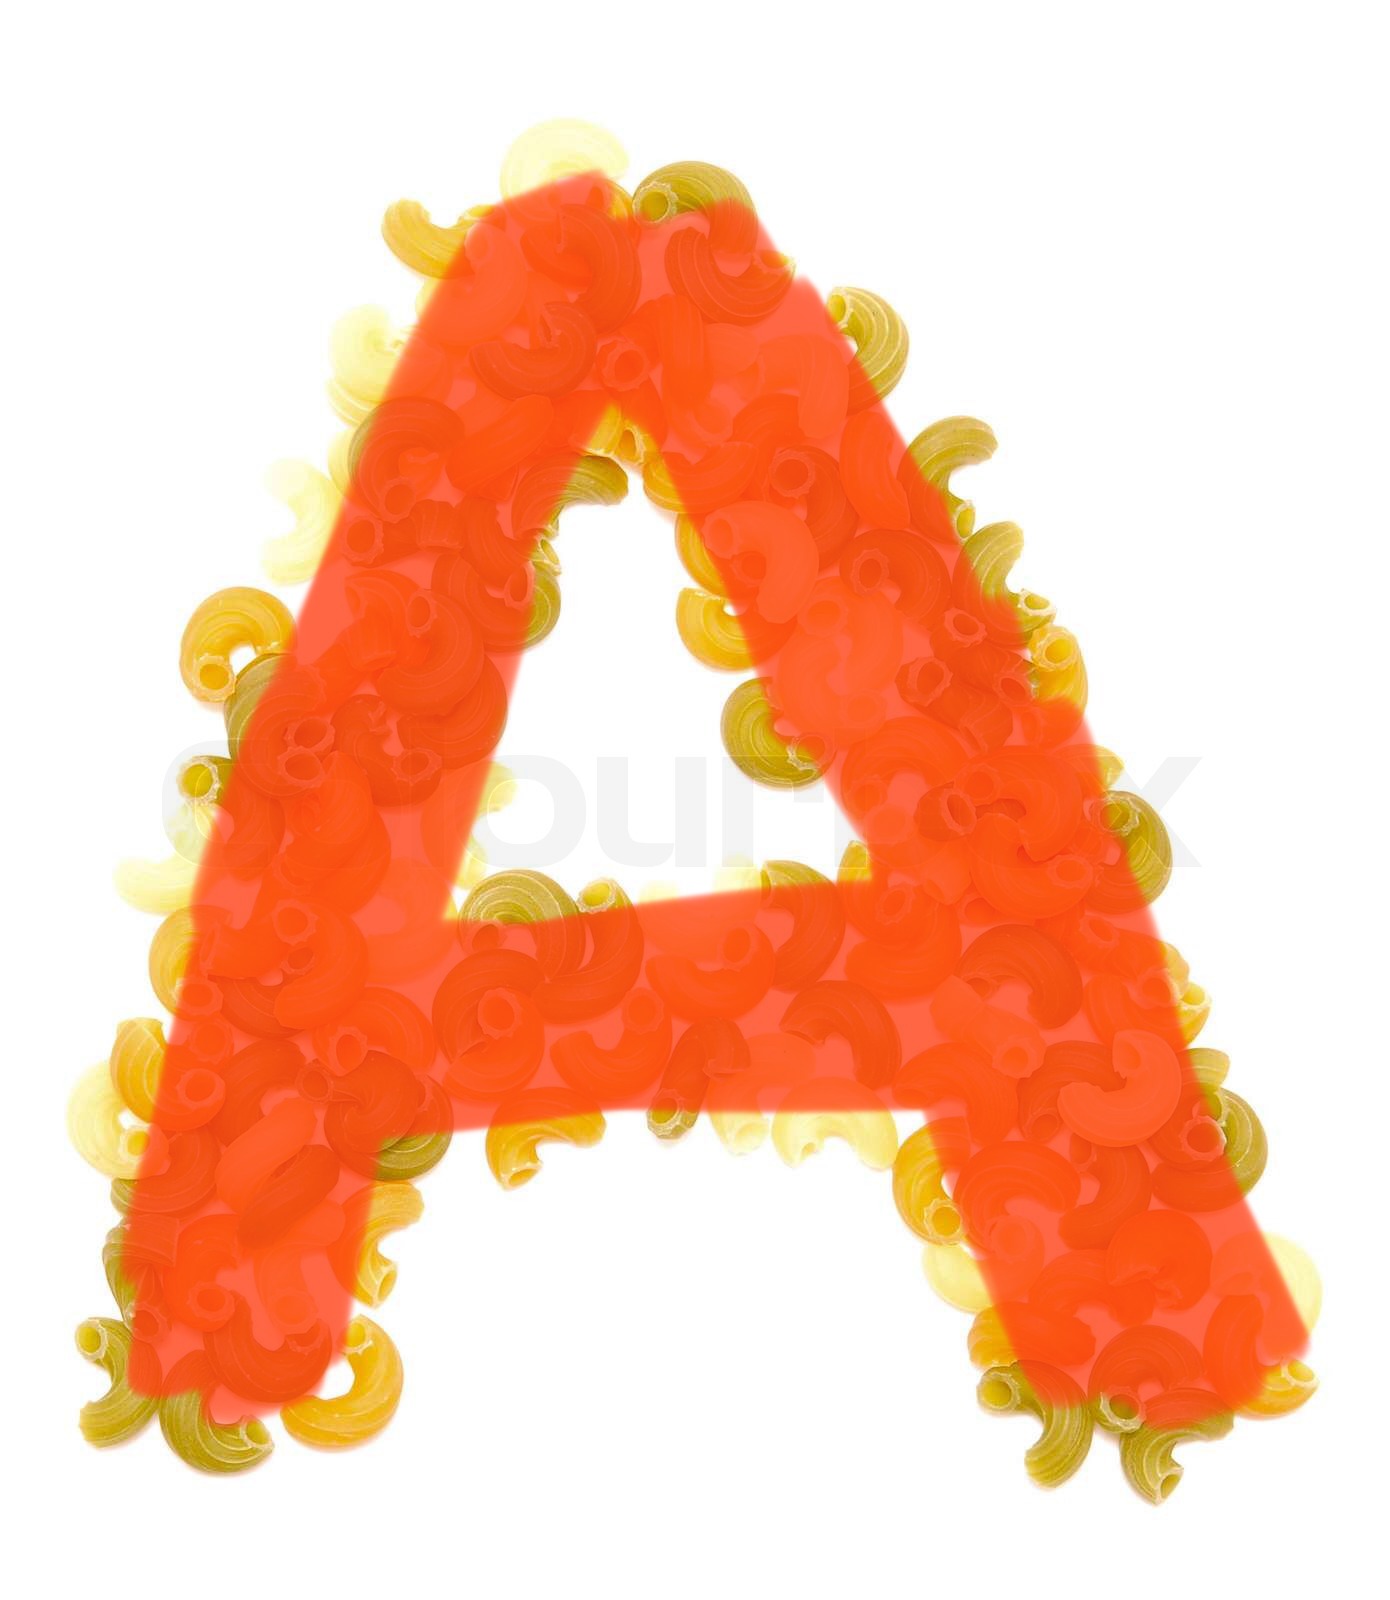  The Letter A Of pastas, pasta